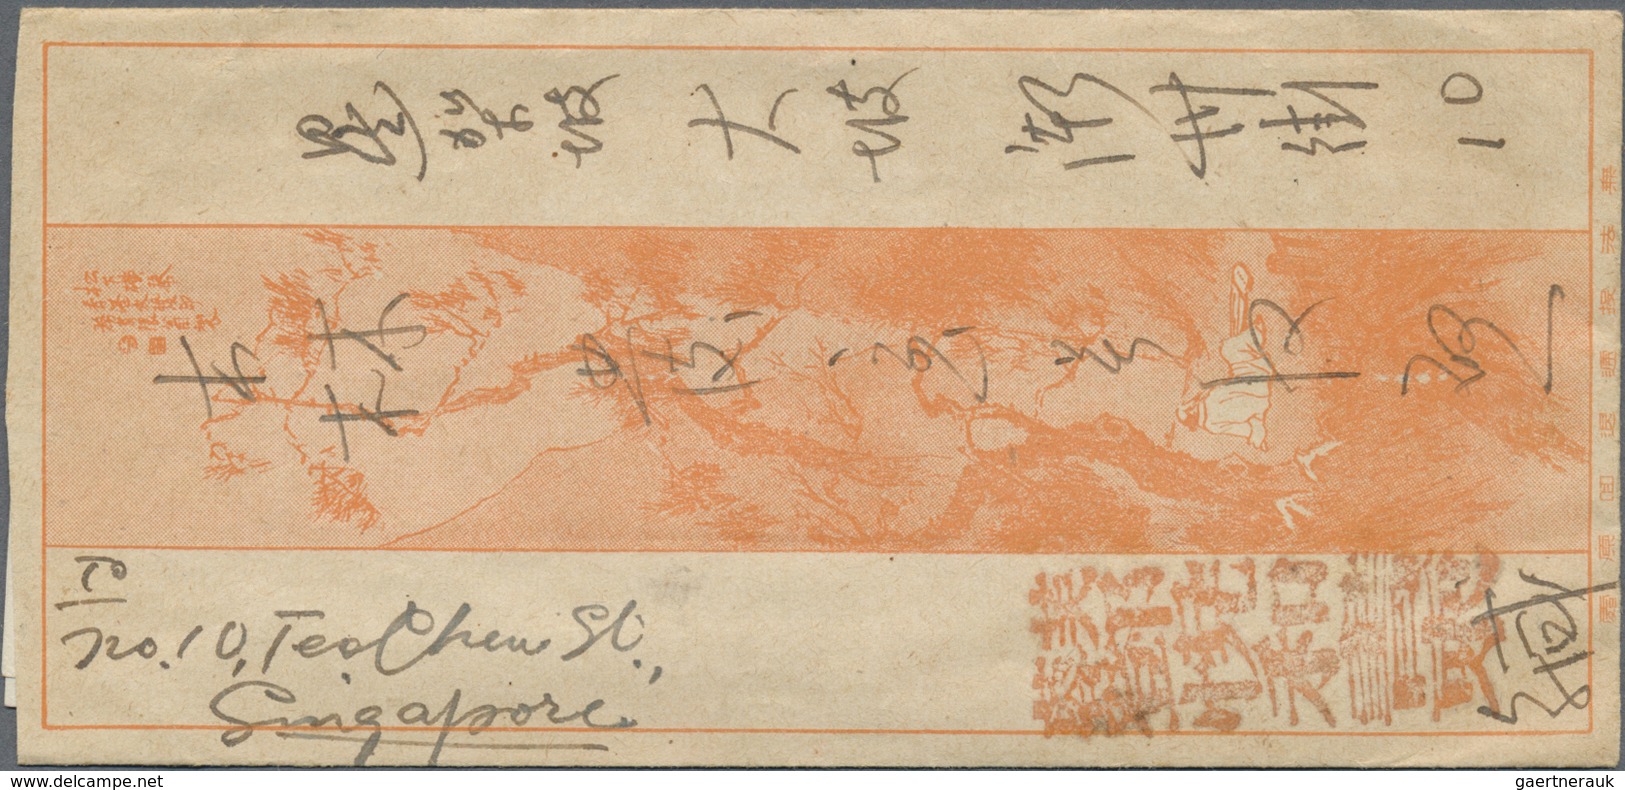 Br Hongkong: 1931/33, four red band covers to Singapore with KGV-frankings; Malaya/BMA Malaya covers (4